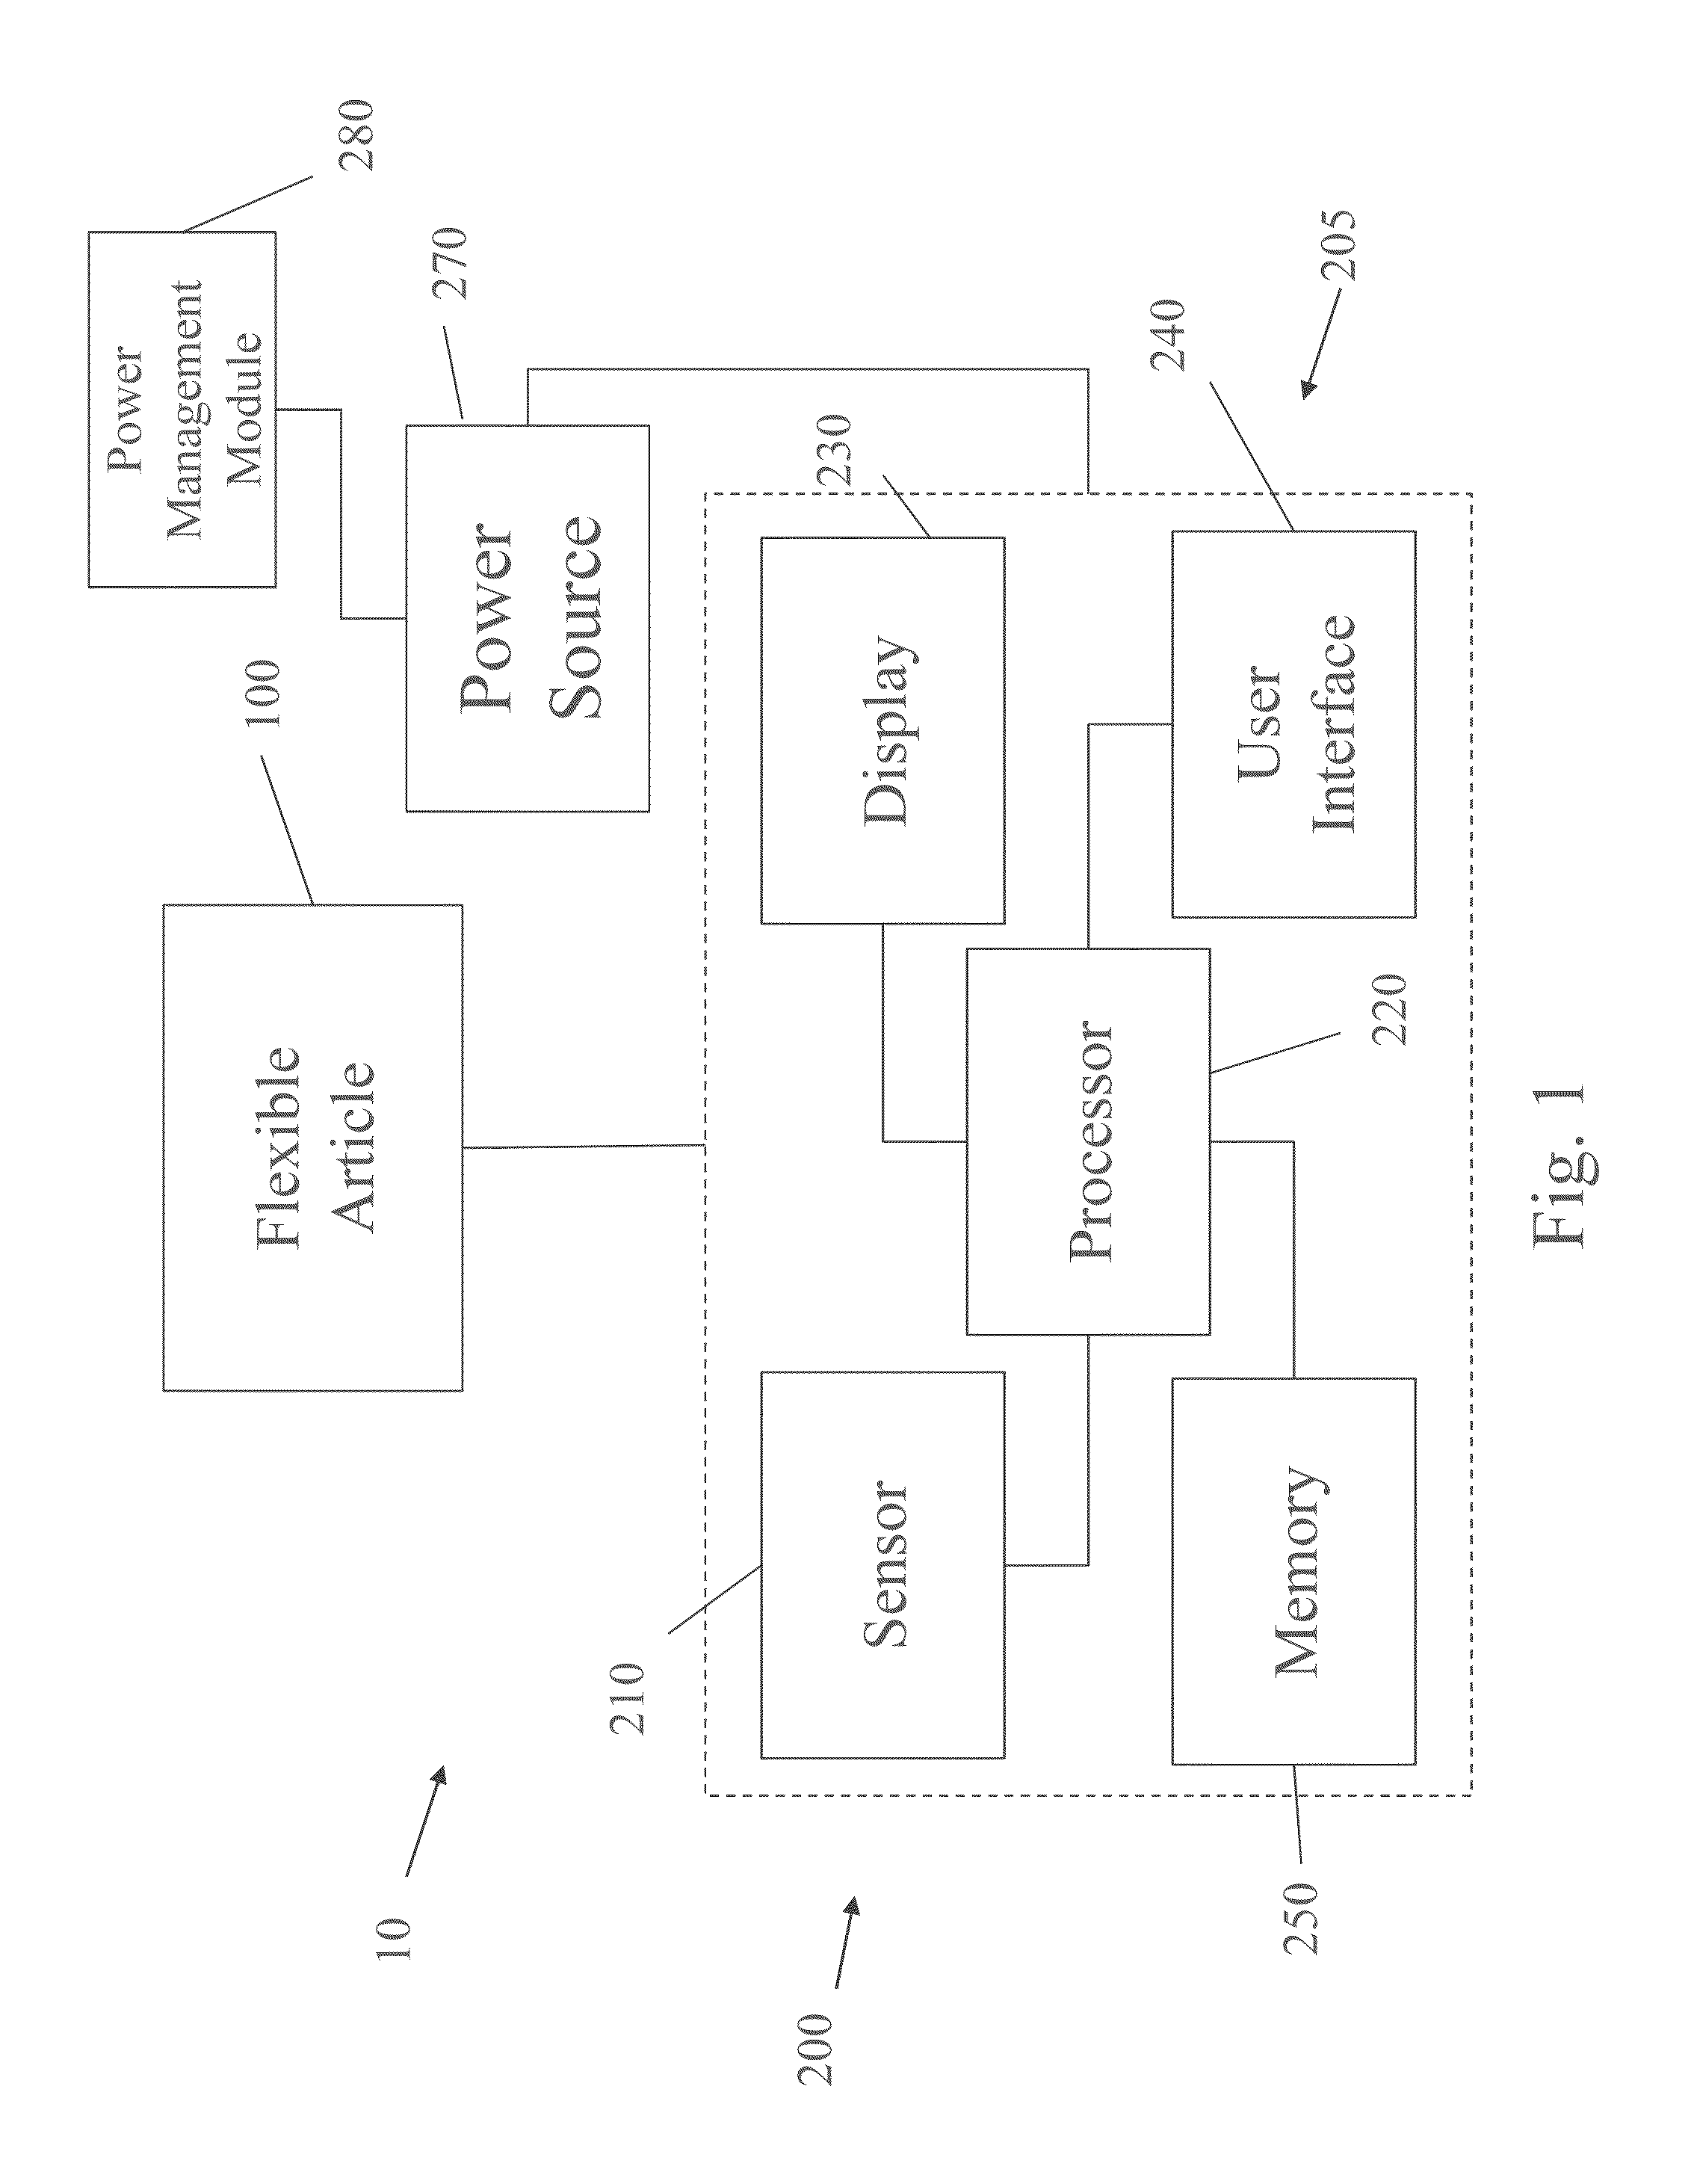 Body Mounted Monitoring System And Method